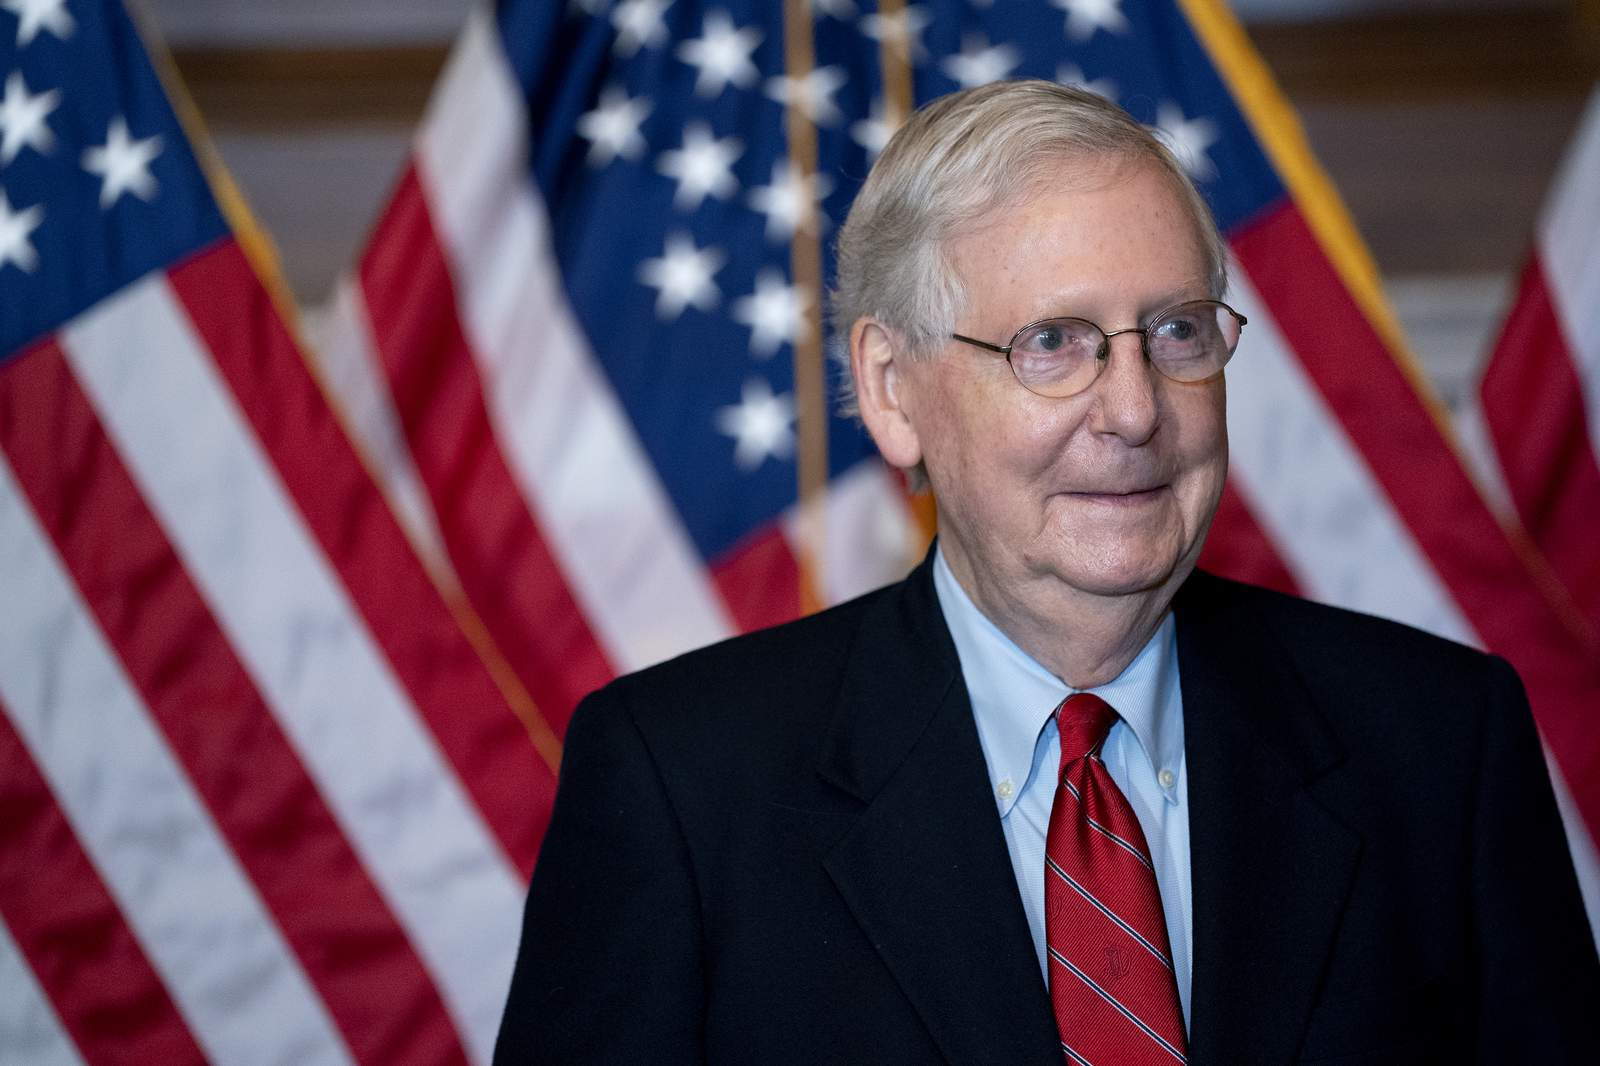 McConnell, Schumer to lead, but Senate majority uncertain